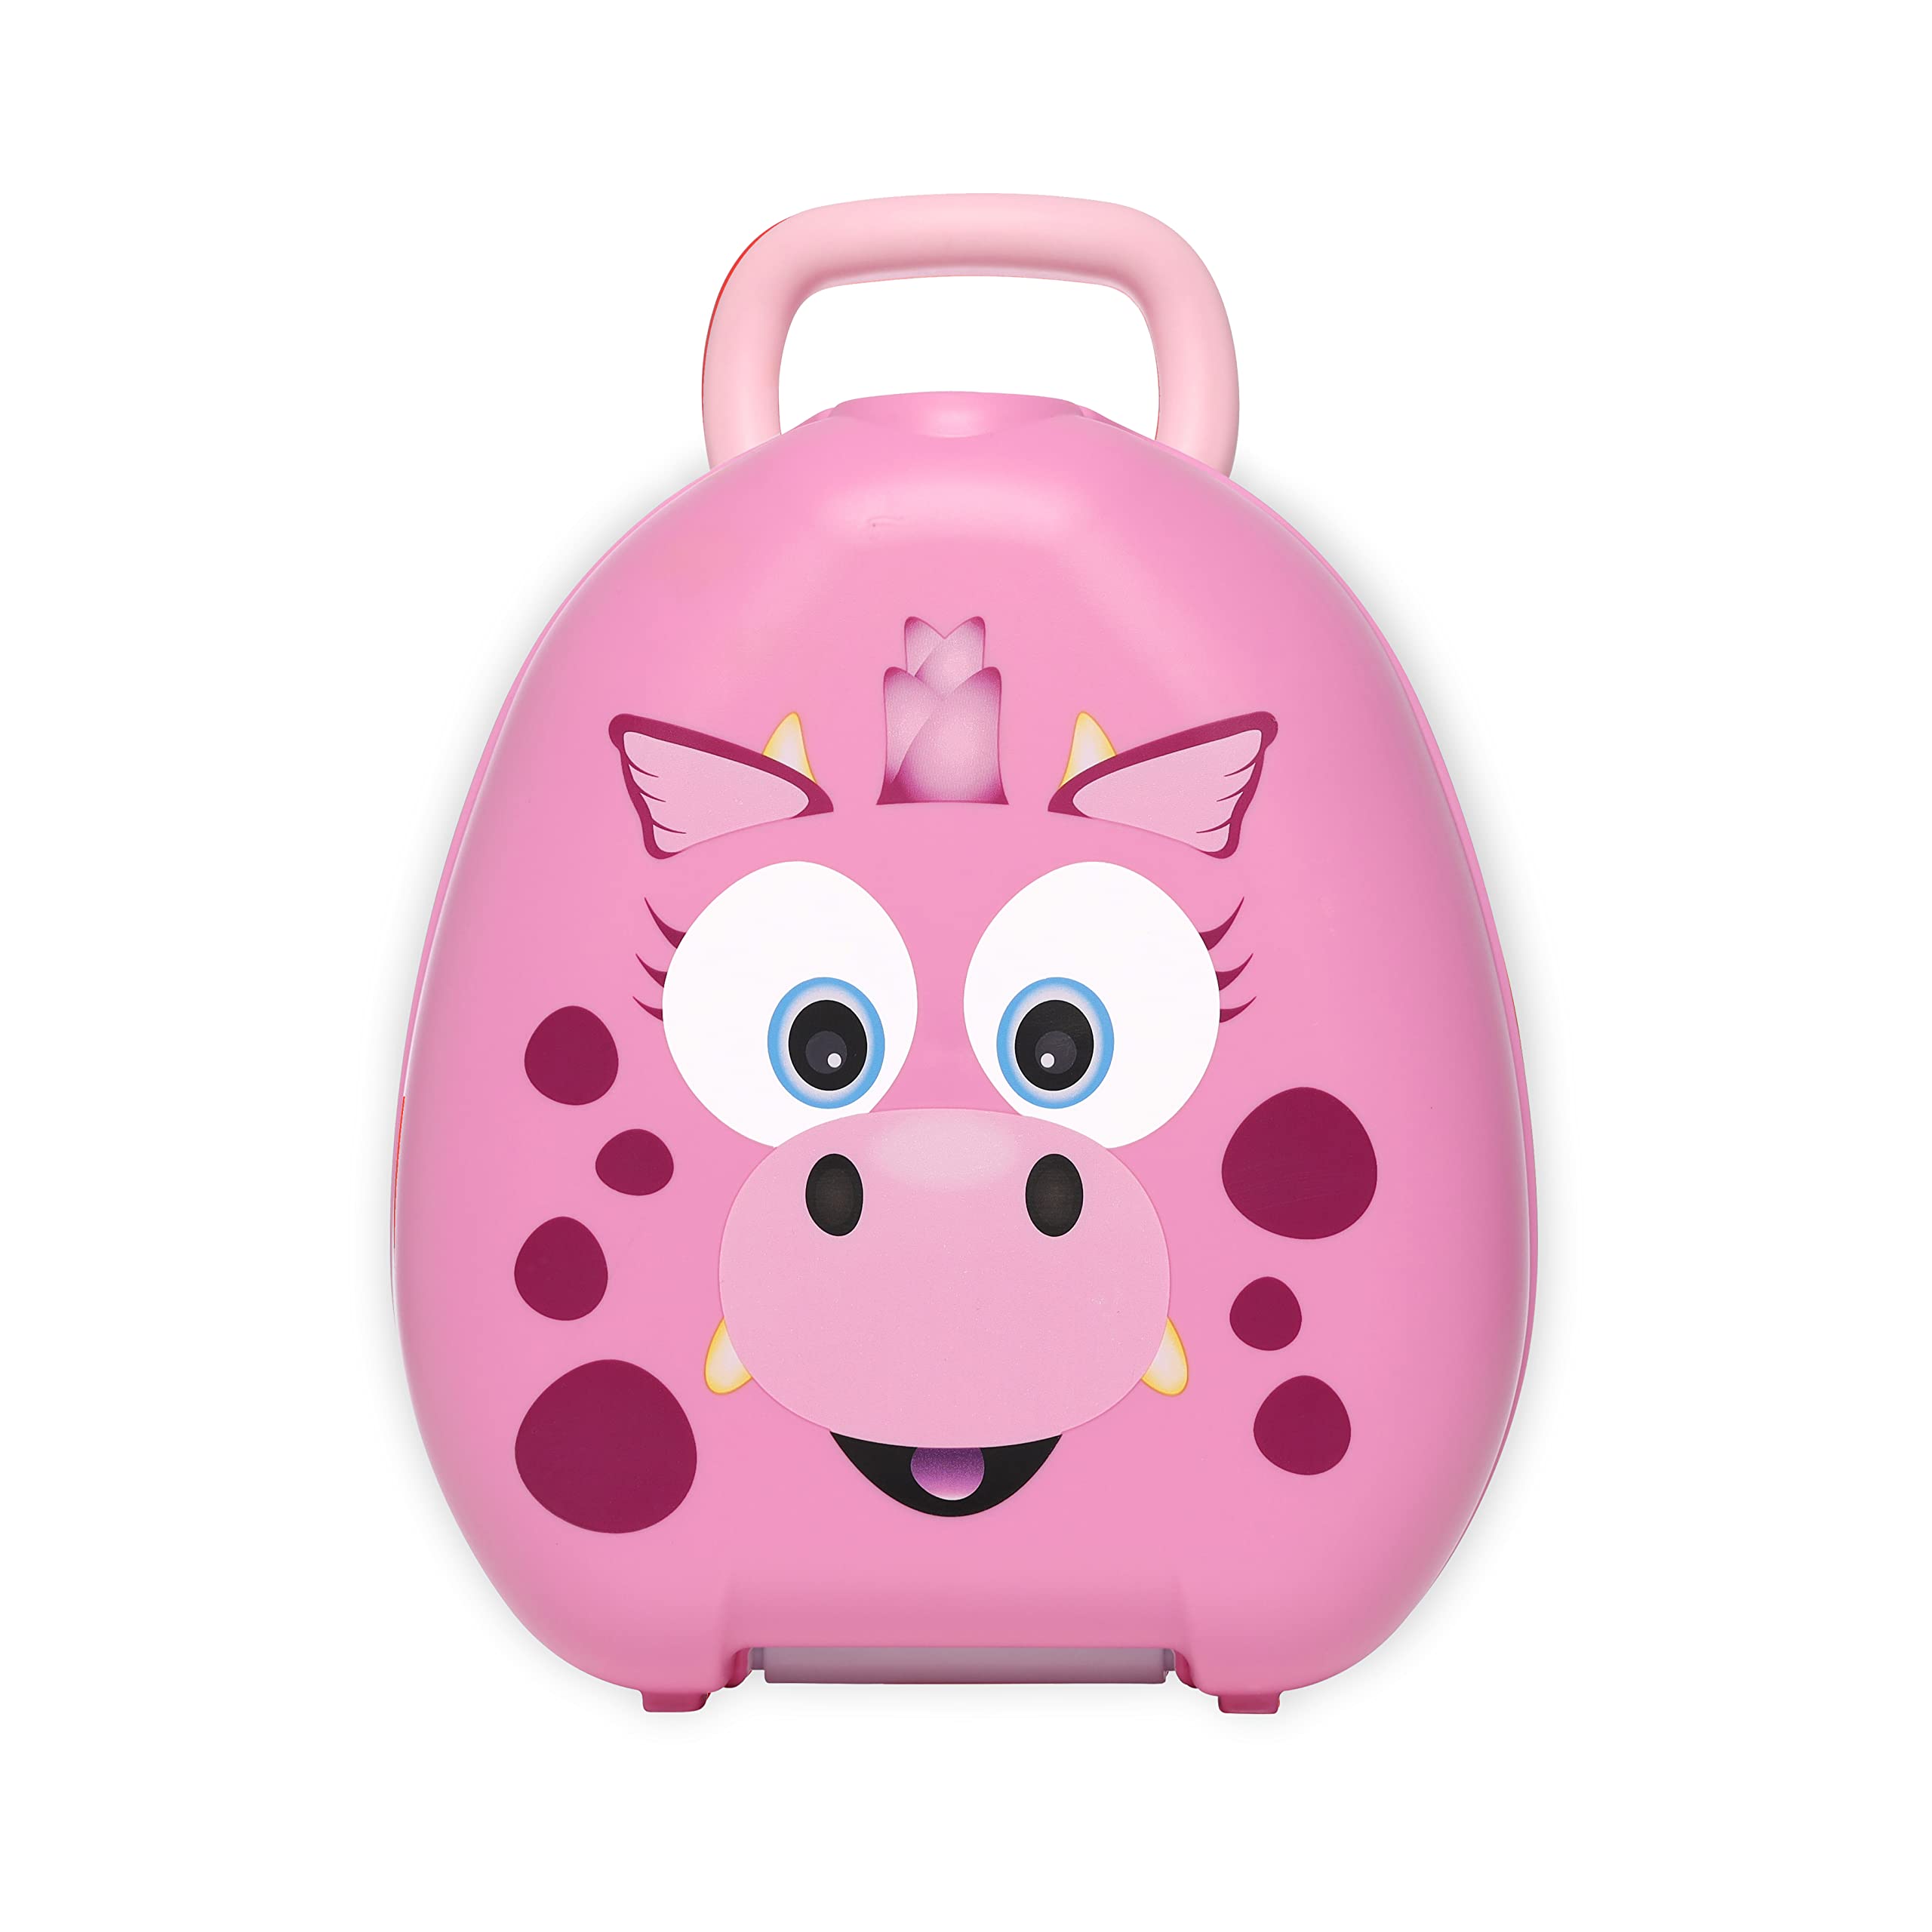 My Carry Potty -Pink Dragon Travel Potty, Award-Winning Portable Toddler Toilet Seat for Kids to Take Everywhere